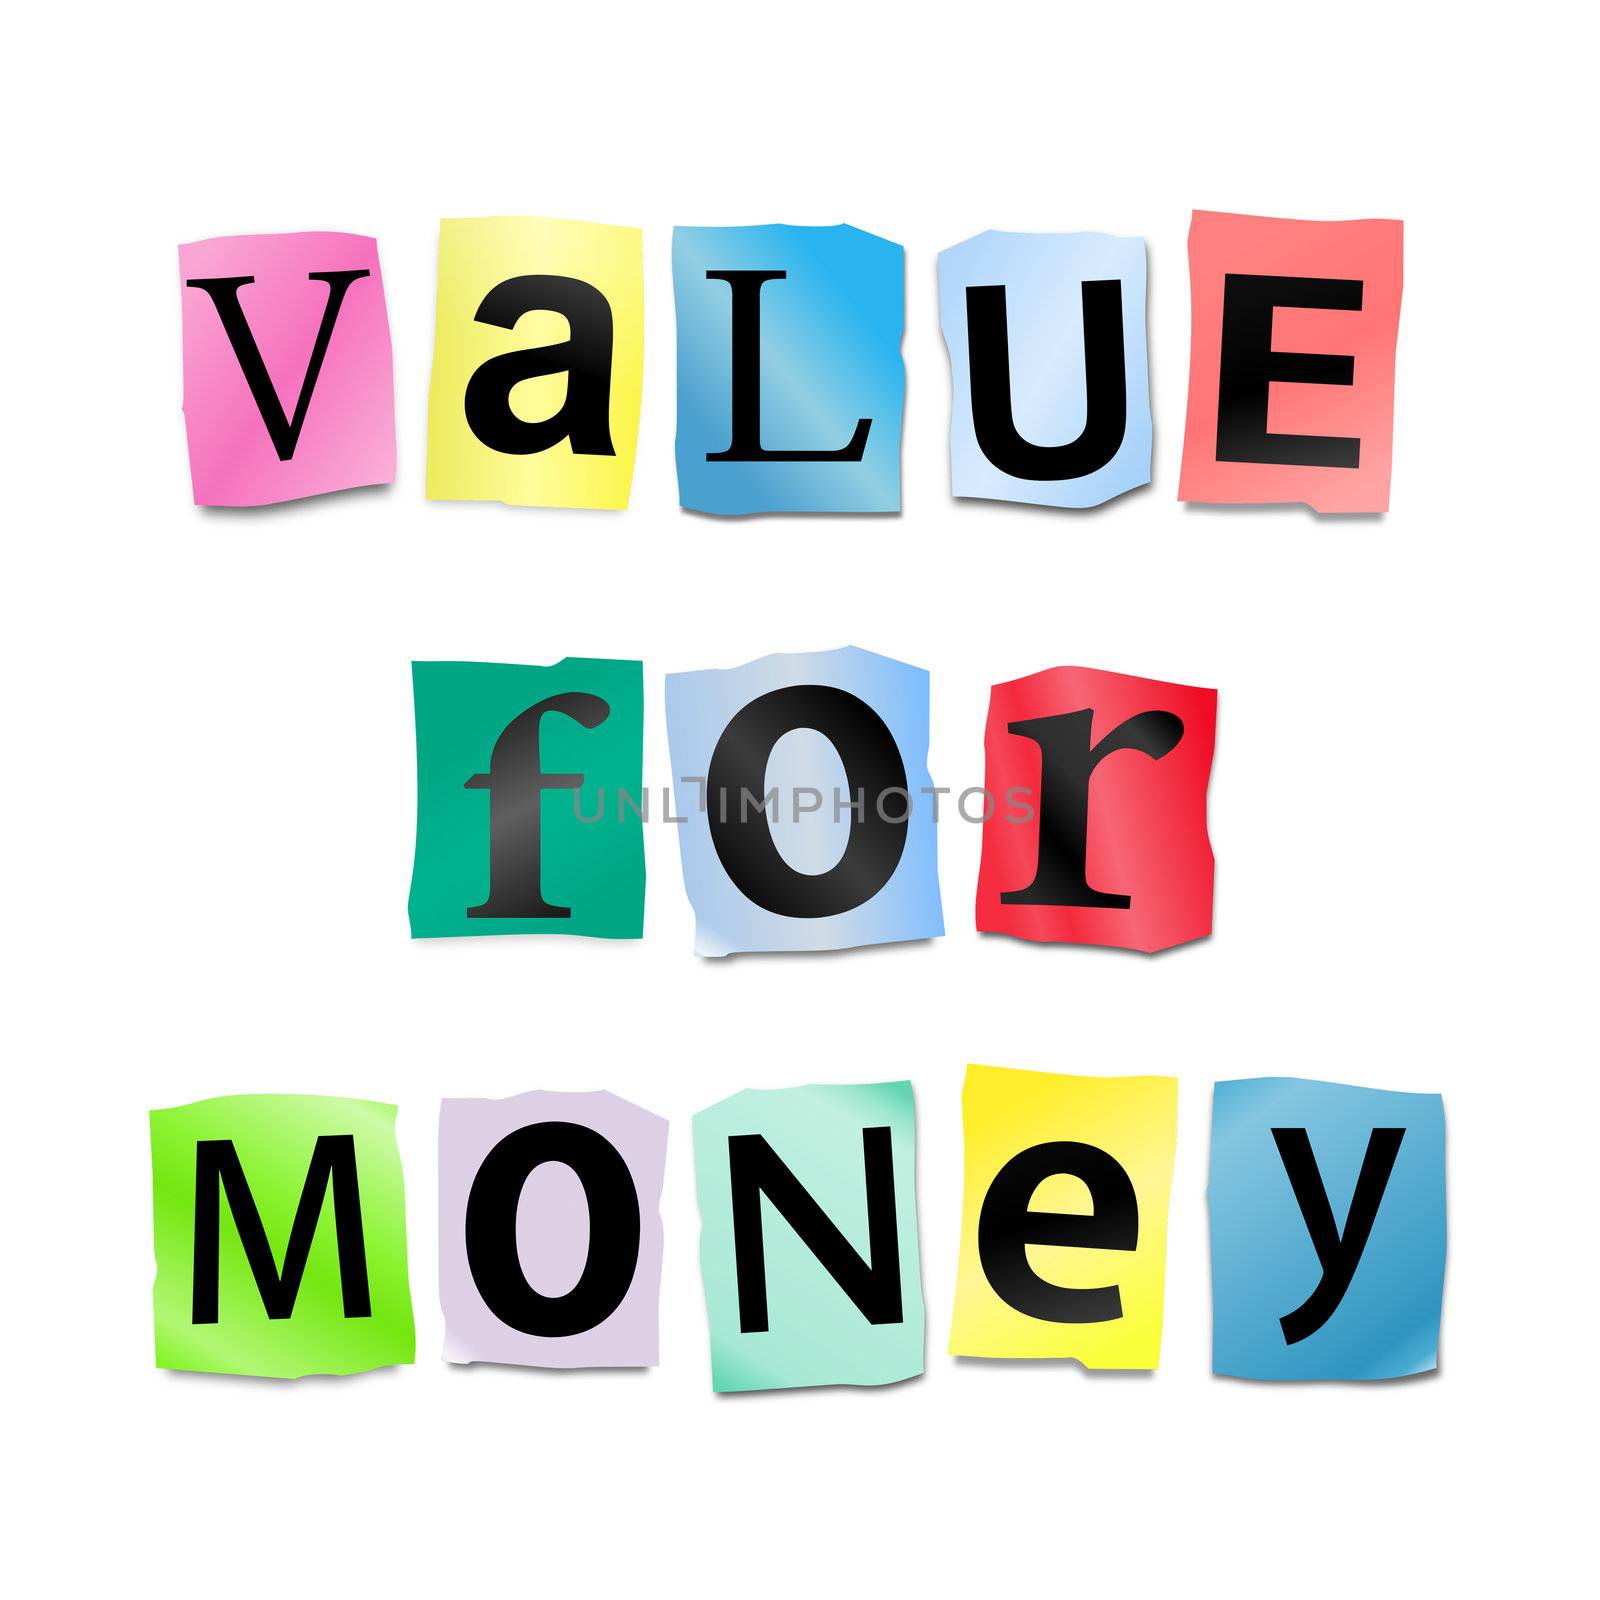 Illustration depicting cutout printed letters arranged to form the words value for money.